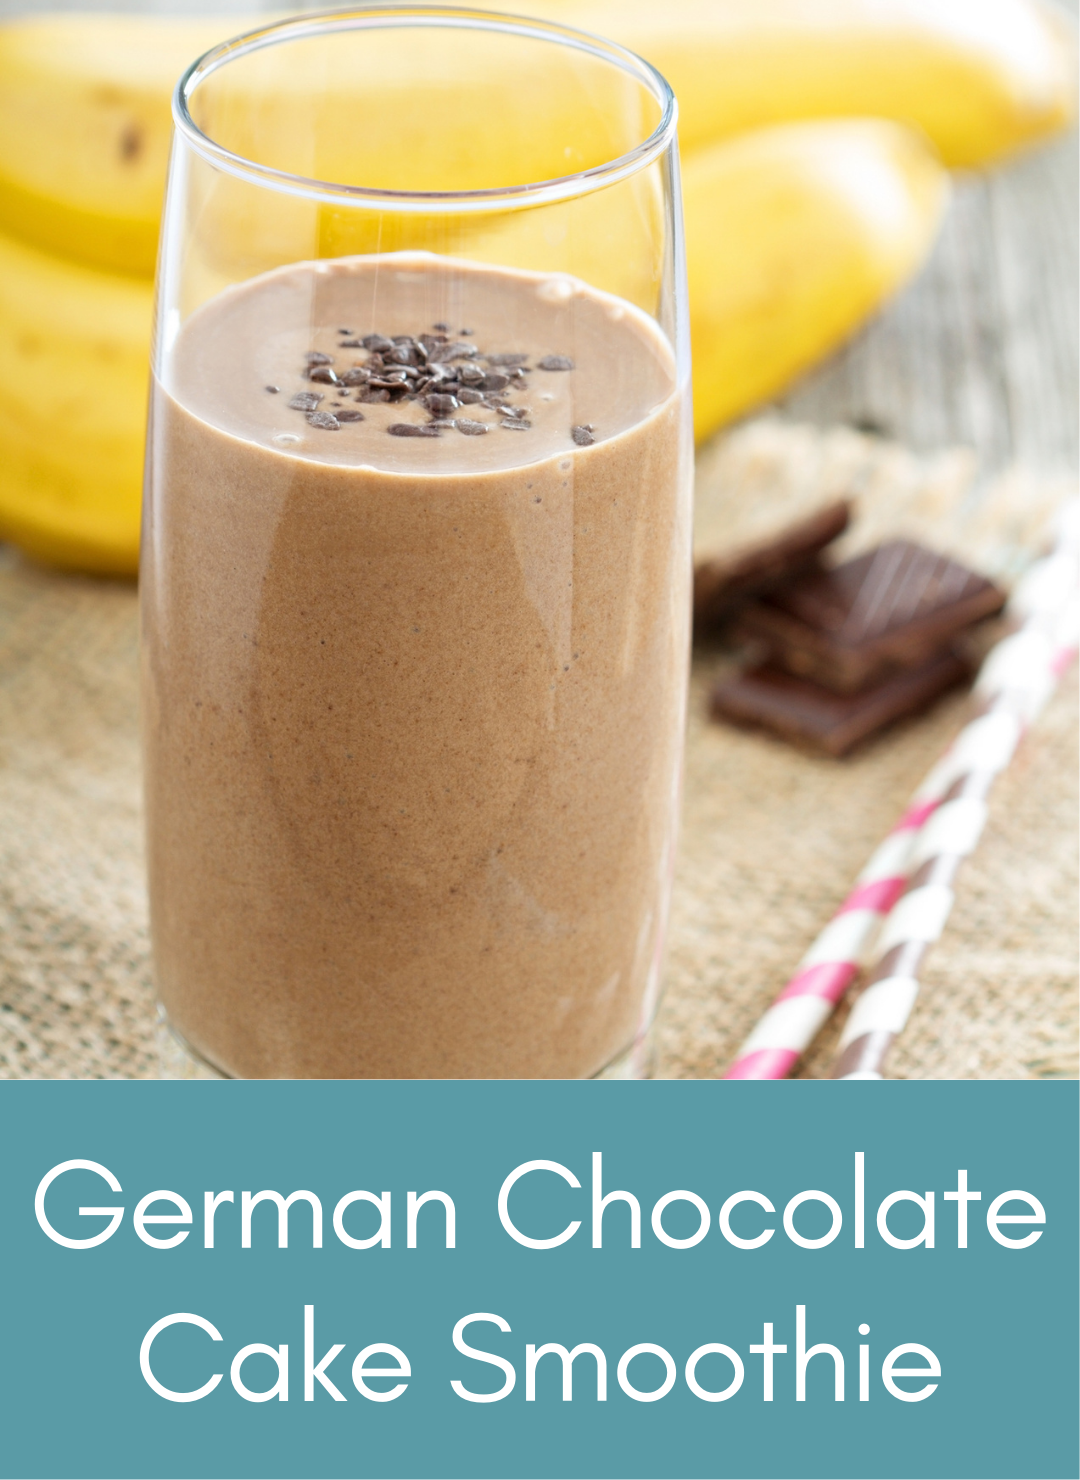 Whole food plant based german chocolate cake smoothie Picture with link to recipe